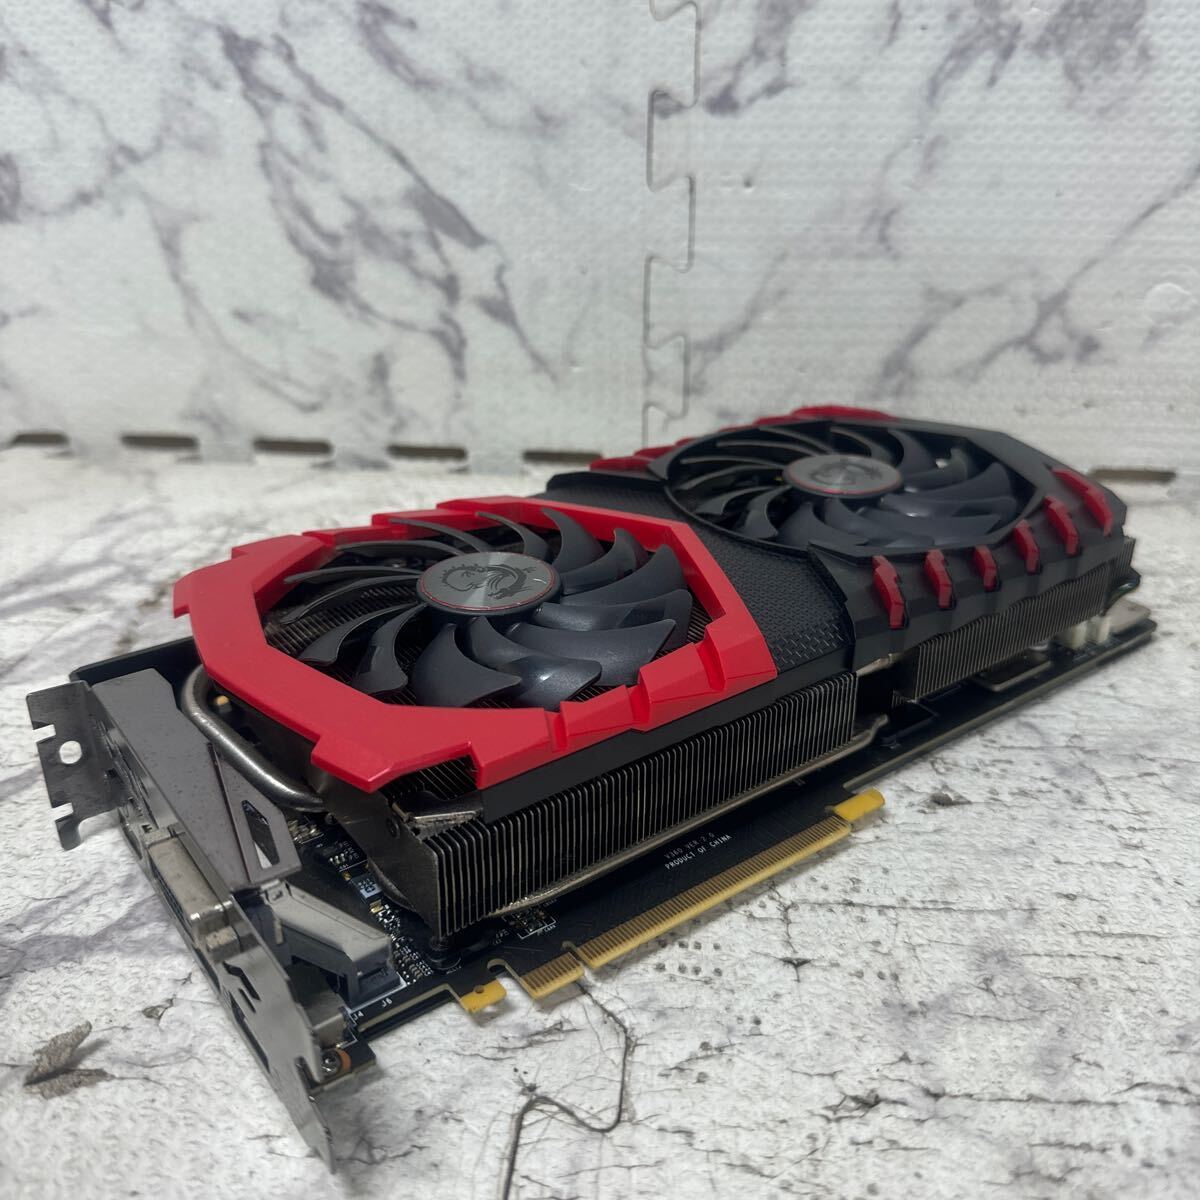 GK super-discount GB-1 graphics board msi Geforce GTX1080Ti GAMING X 11G awareness. image output only verification secondhand goods including in a package possibility 